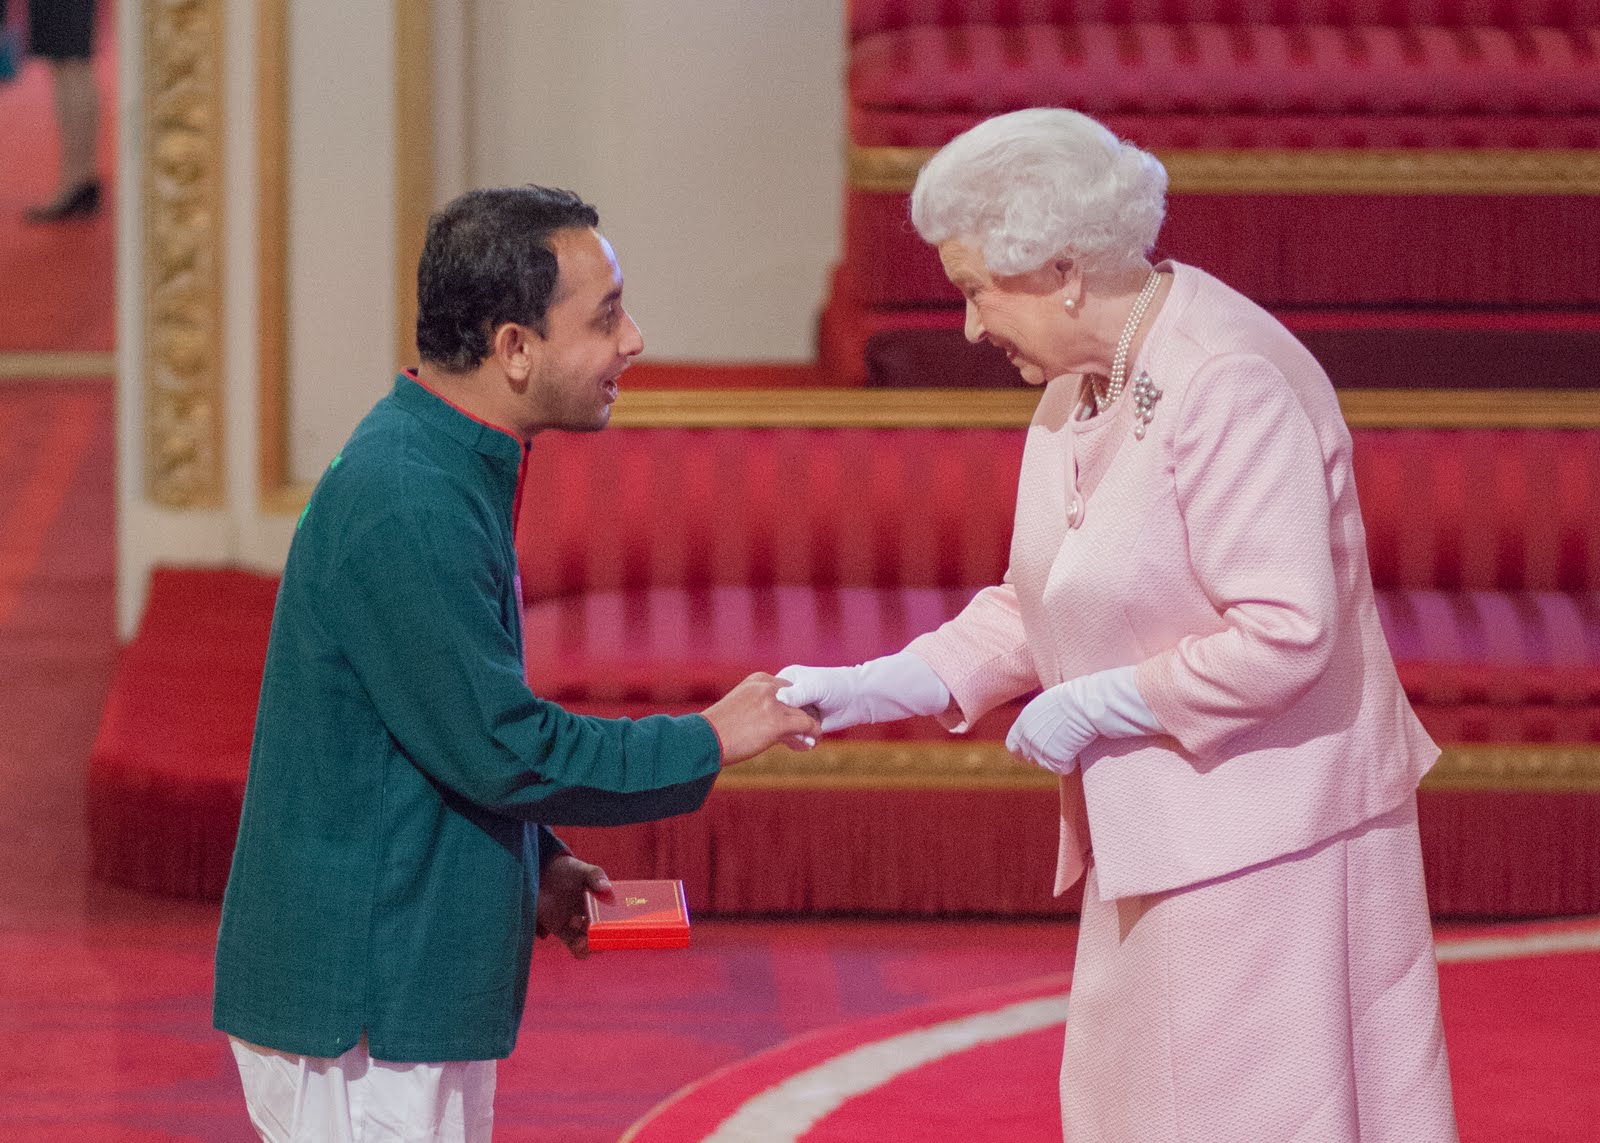 Mohammed Shamir Shehab 2015 Queen's Young Leader from Bangladesh